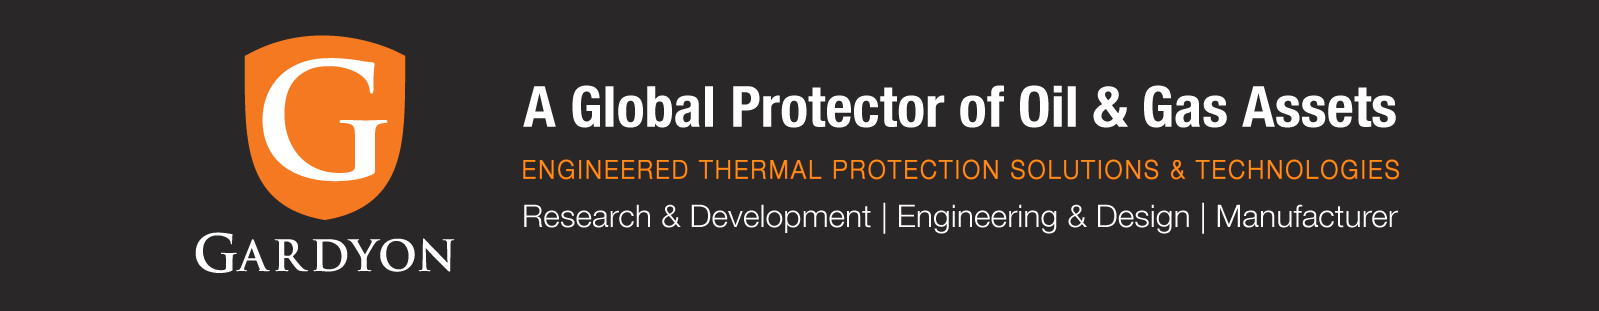 GARDYON Engineered Thermal Protection Solutions and Technologies